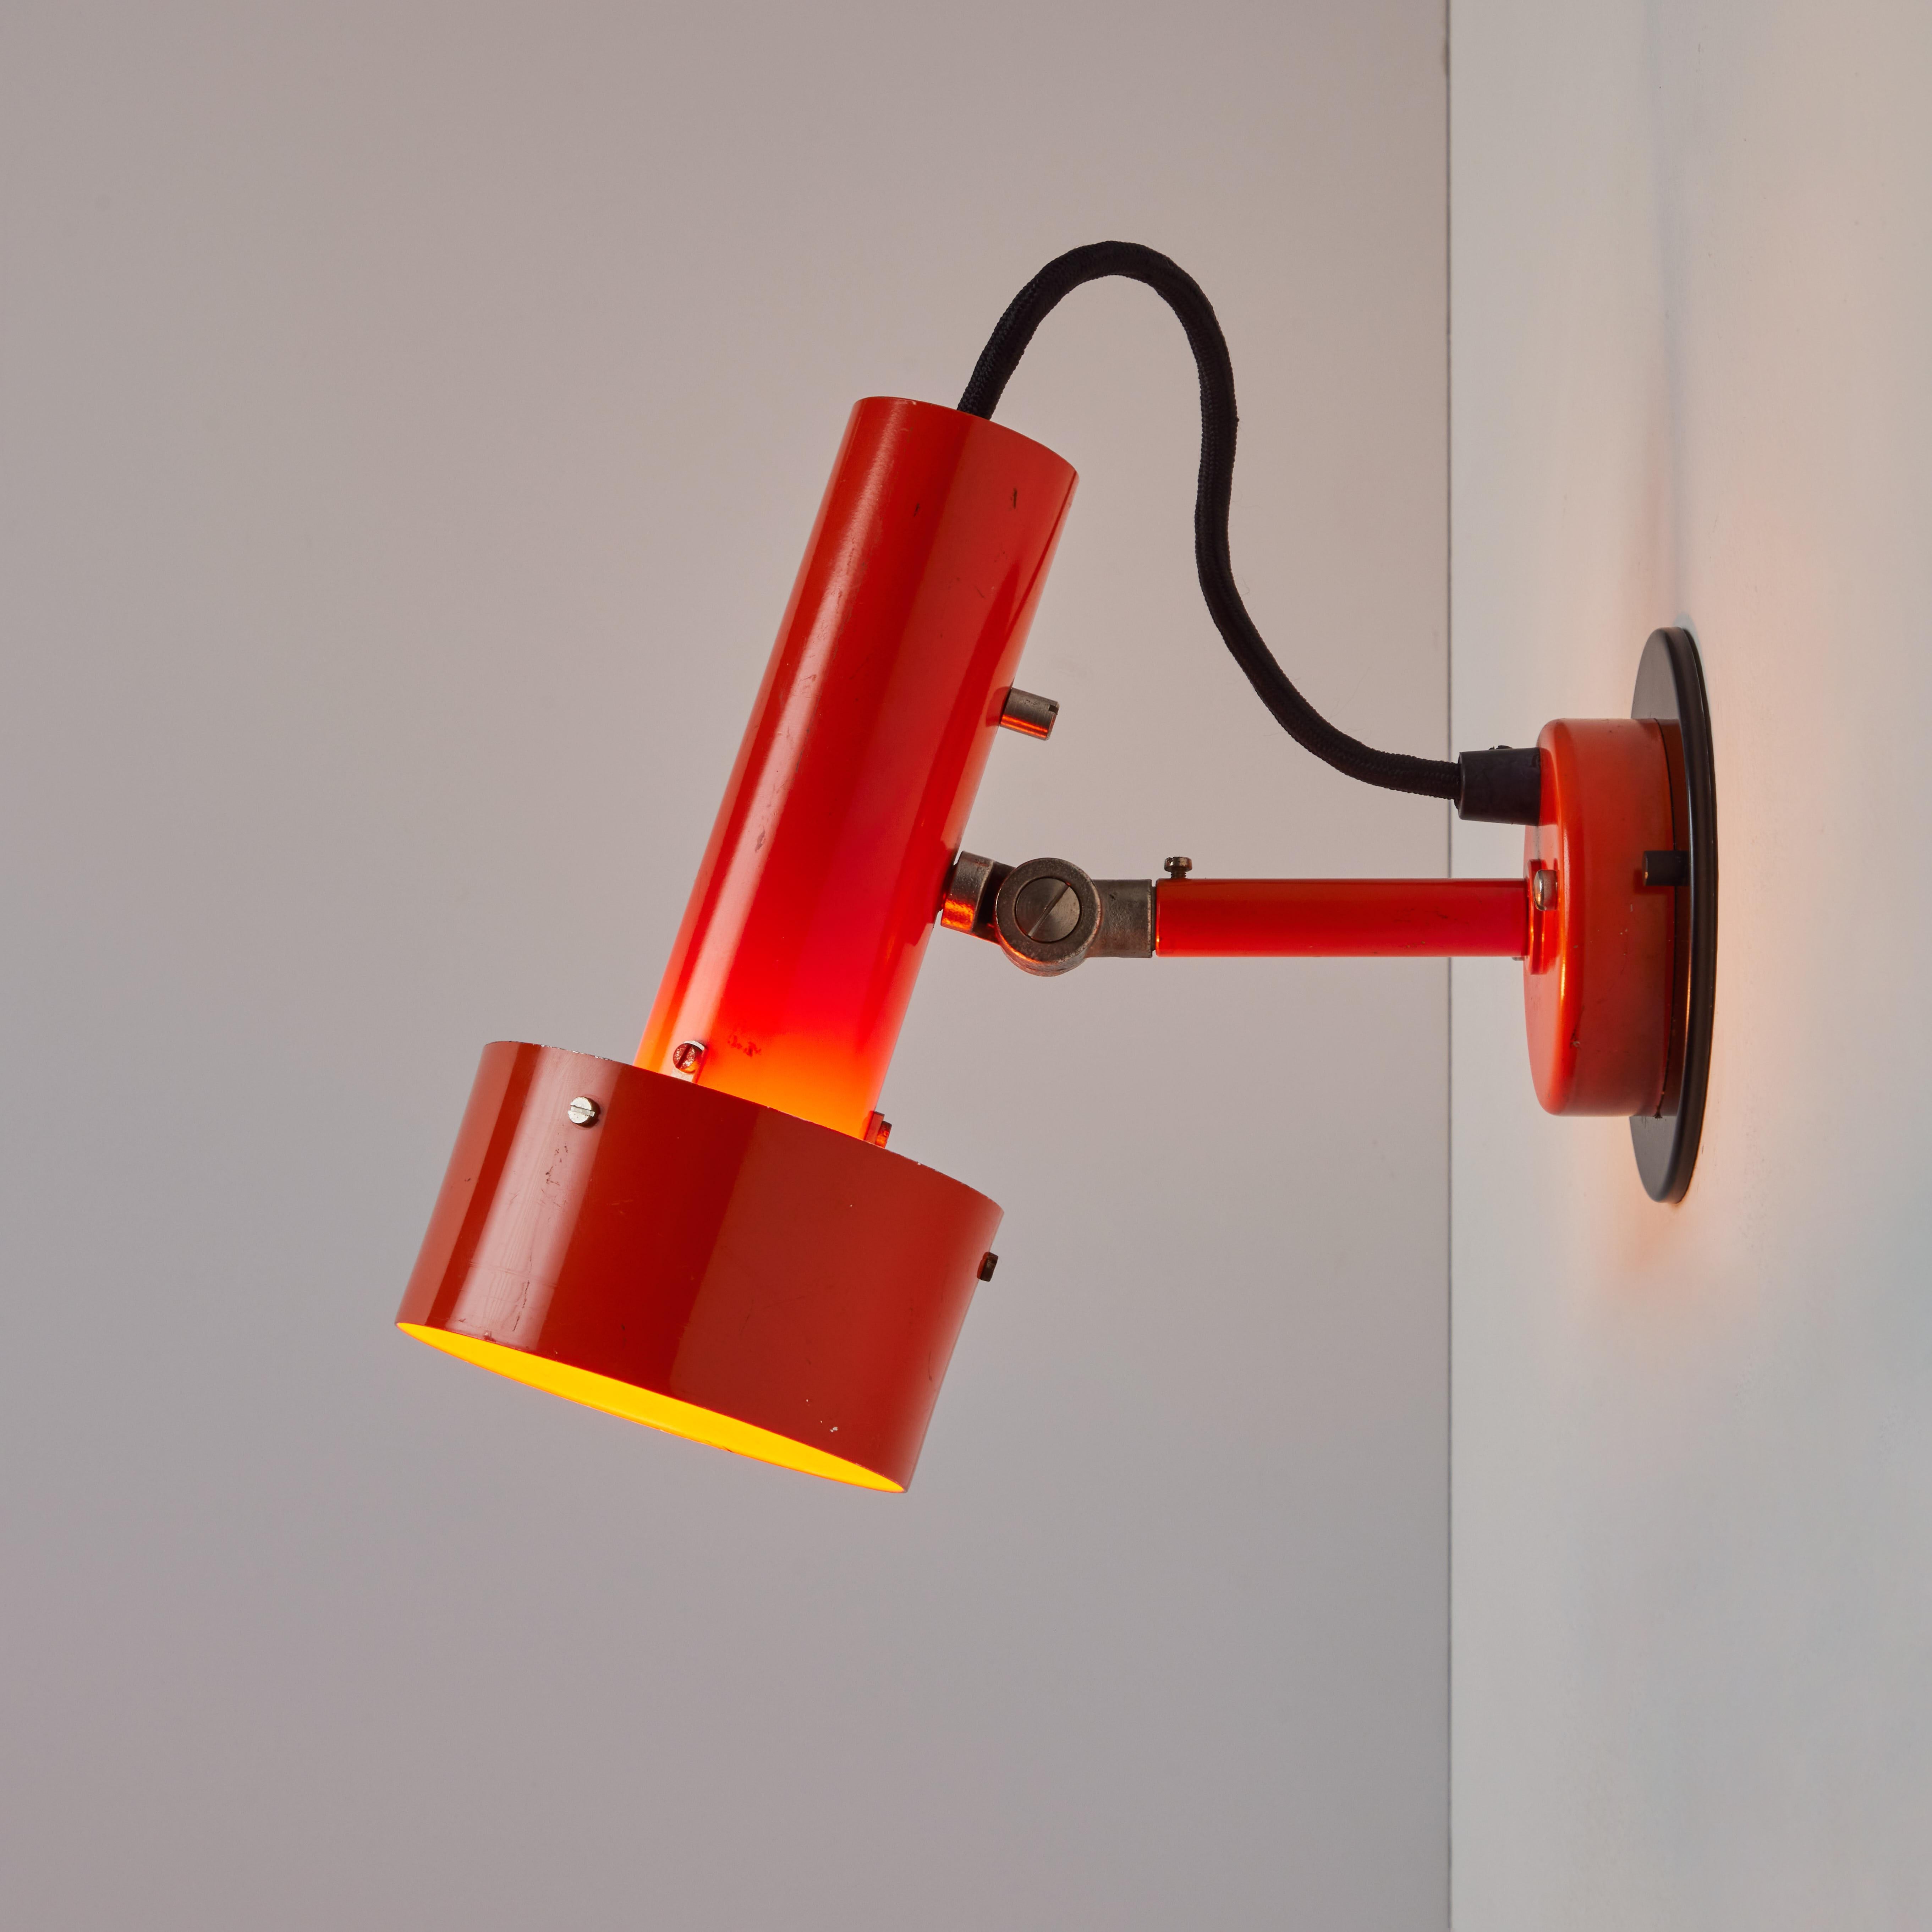 Pair of Large 1970s Orange Sconces for Nordisk Solar.

Executed in bright orange painted metal shade with black backplate which has been professionally modified for mounting over standard US j-box. A very architectural and refined wall lamp